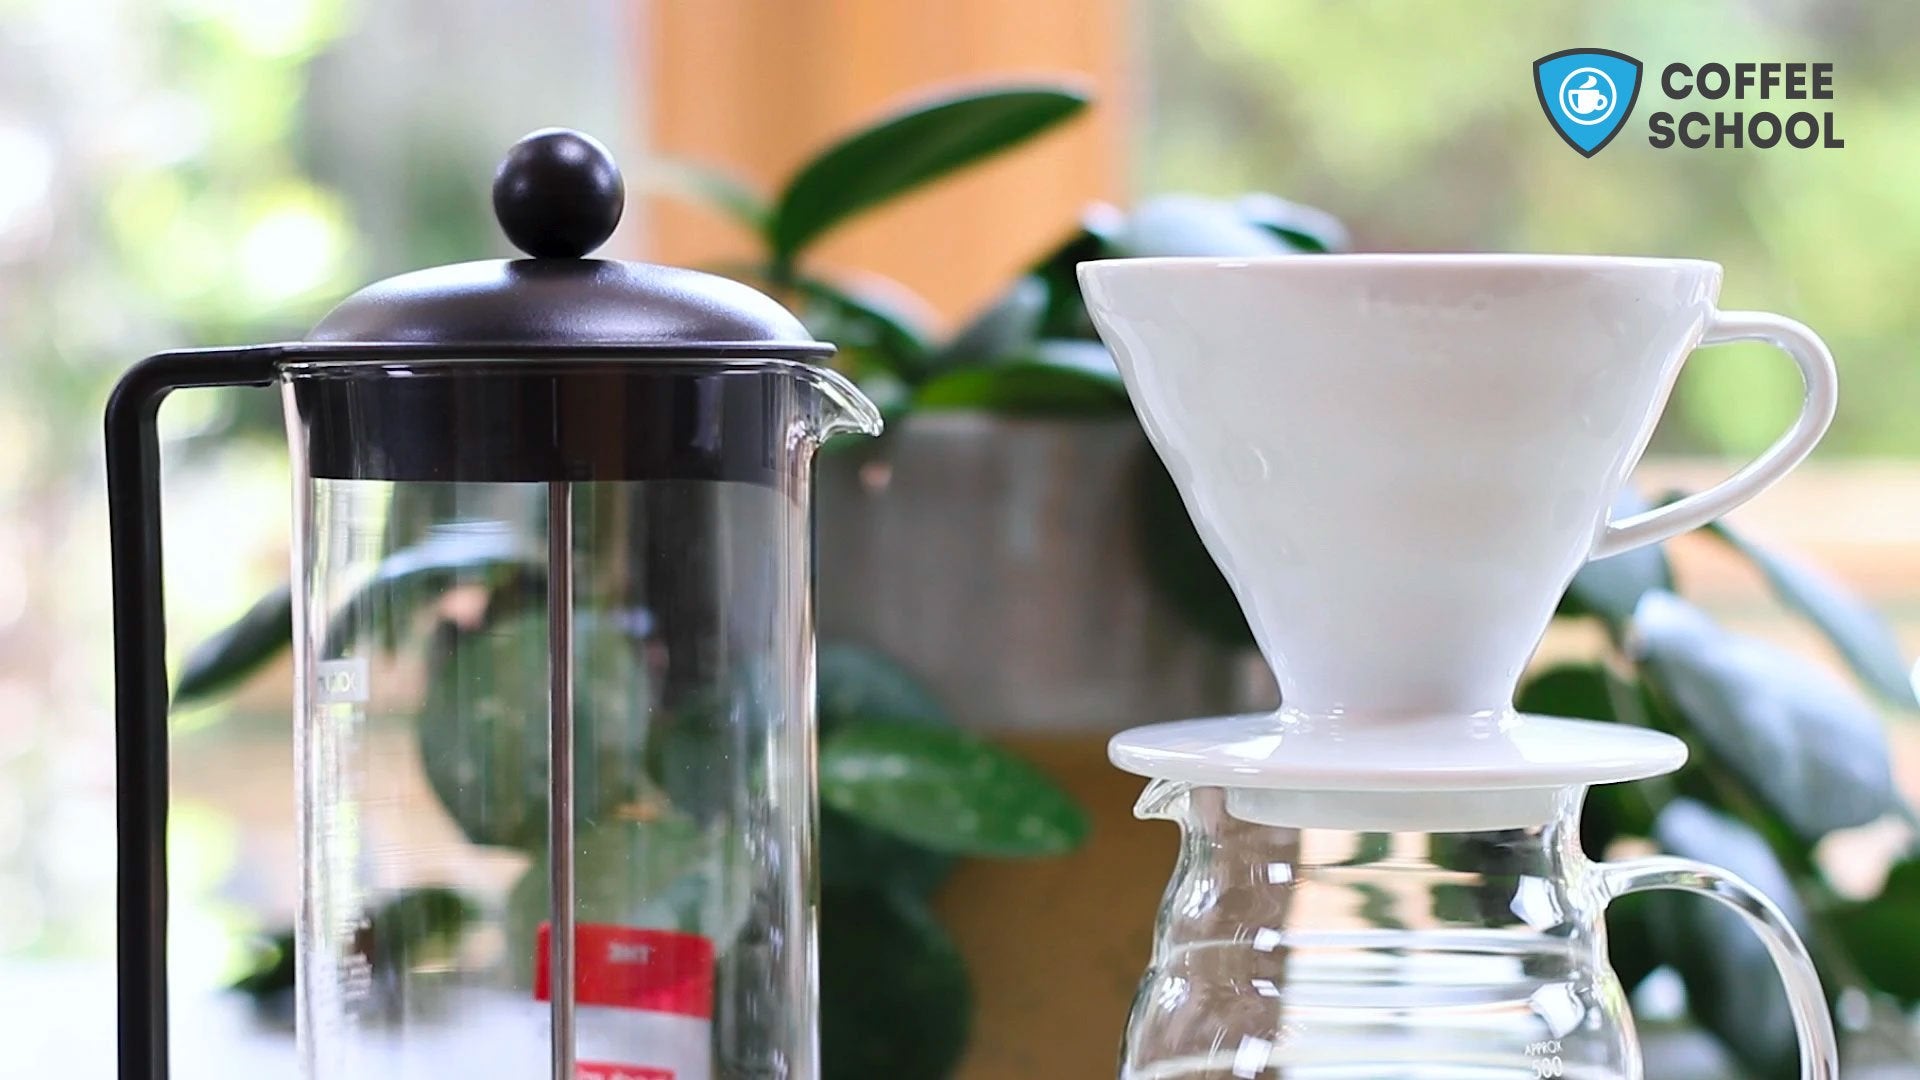 Online Coffee School, Intro to Home Brewing, Hario V60 pour over, French Press